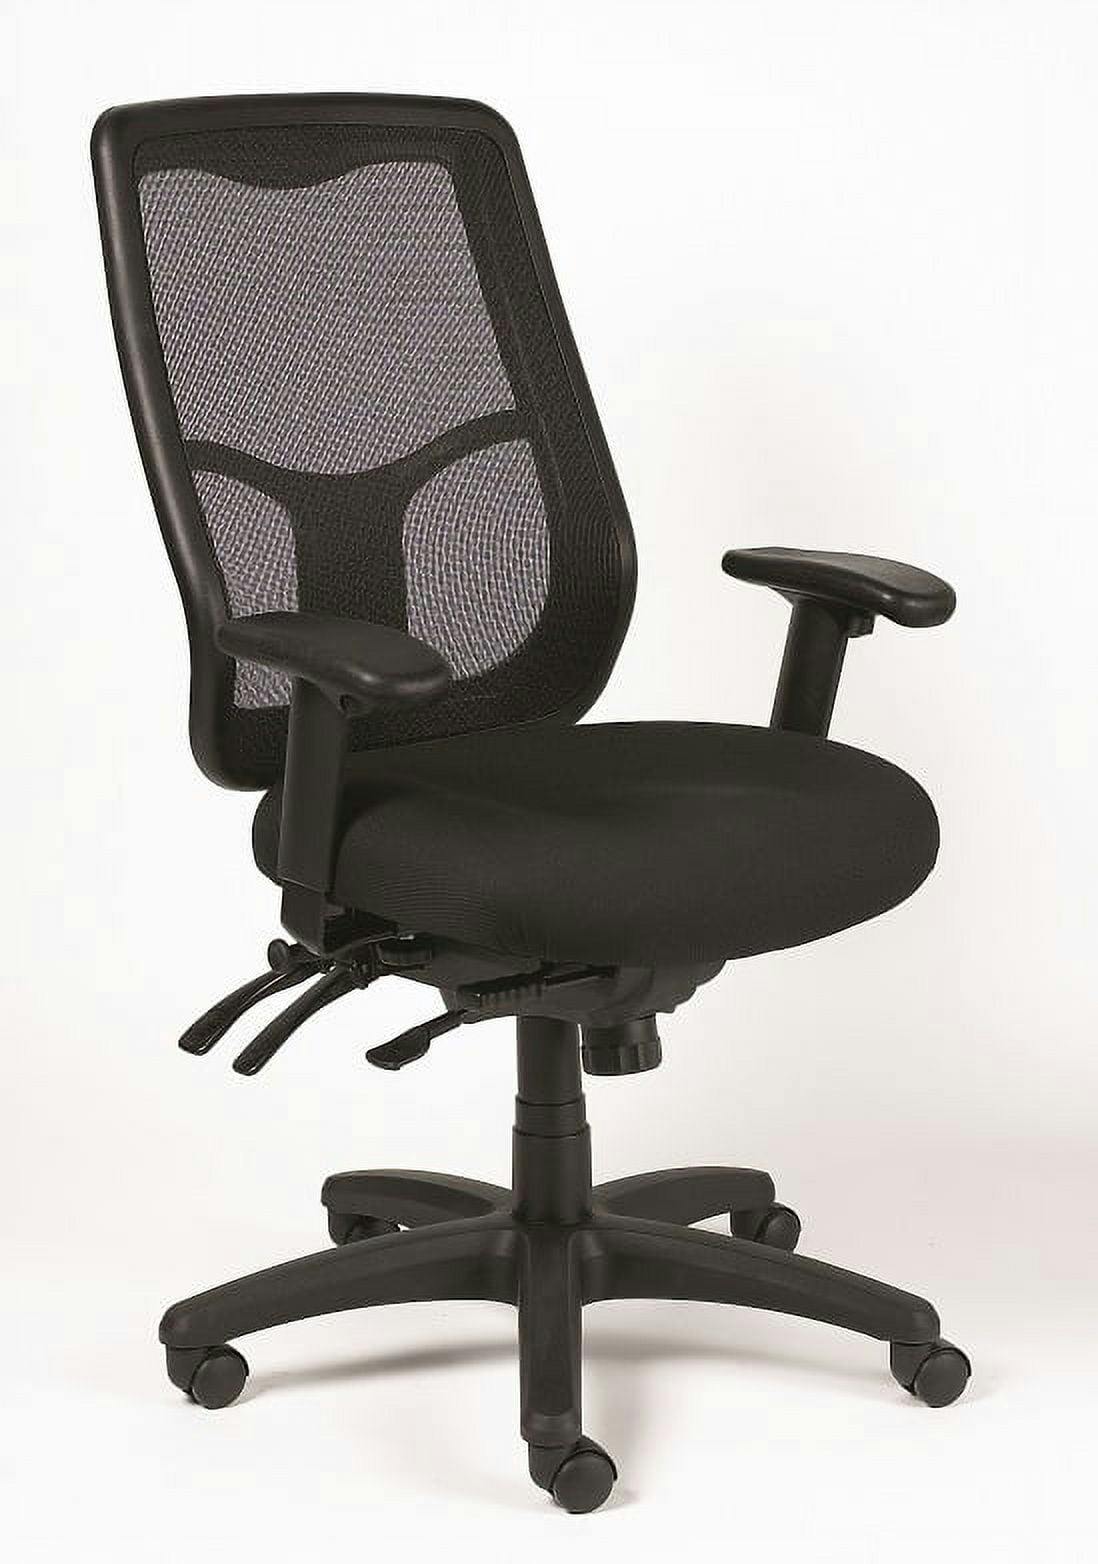 Apollo Executive High Back Swivel Chair with Adjustable Arms in Black